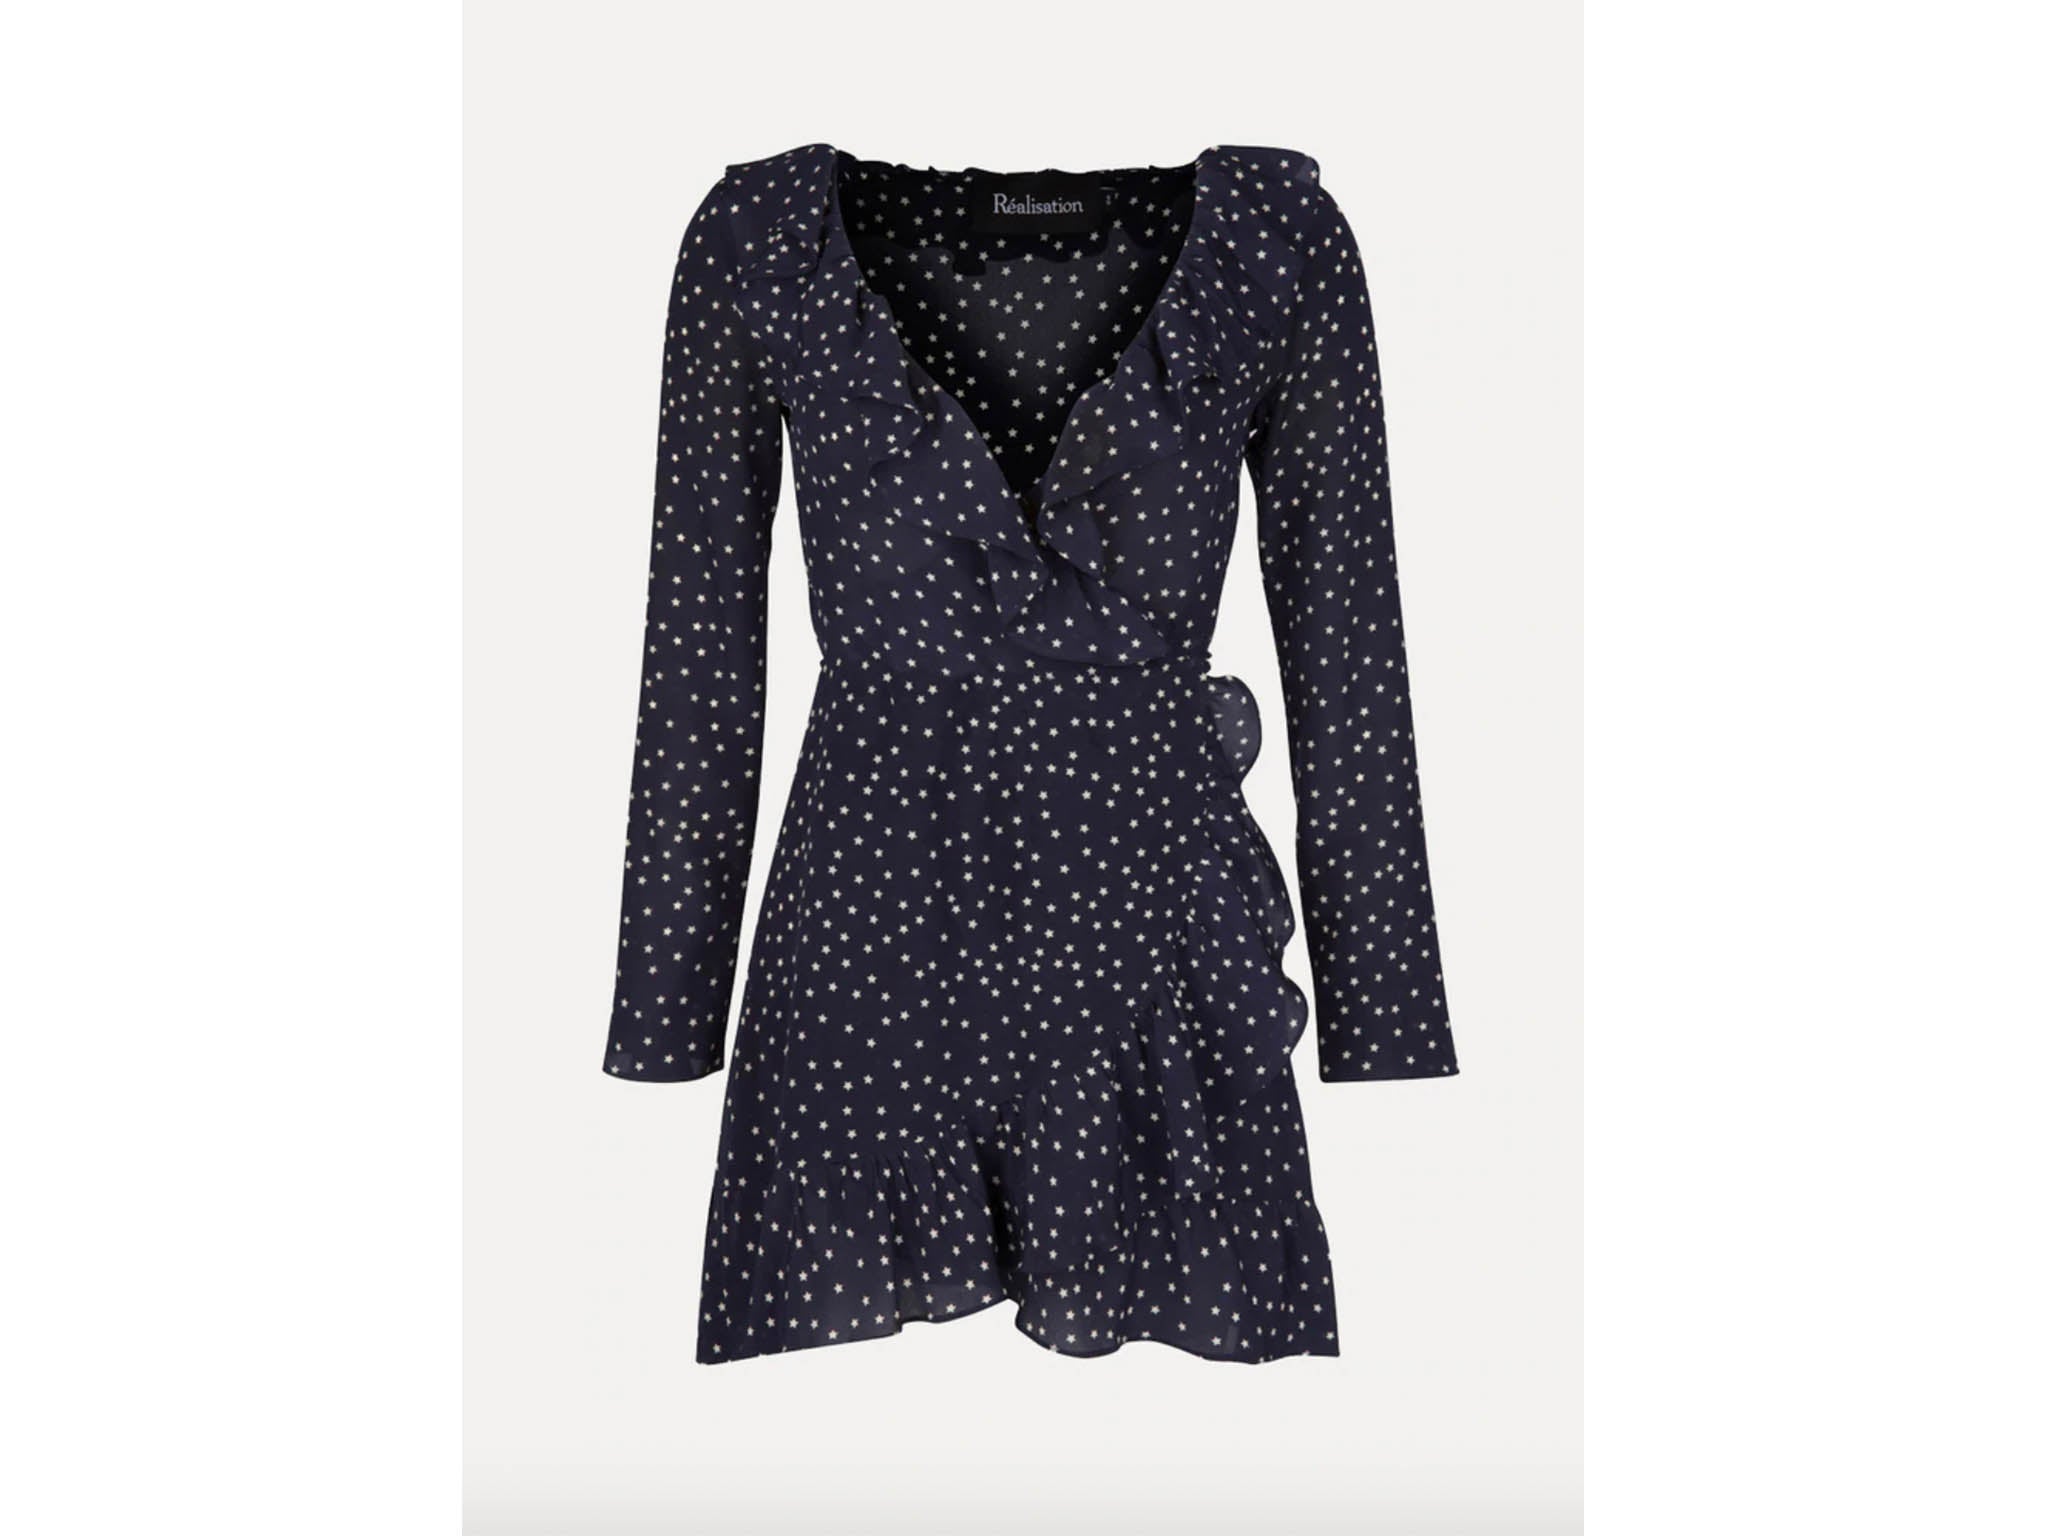 You can't go wrong with a wrap dress and this navy polka-dot shade will suit everyone